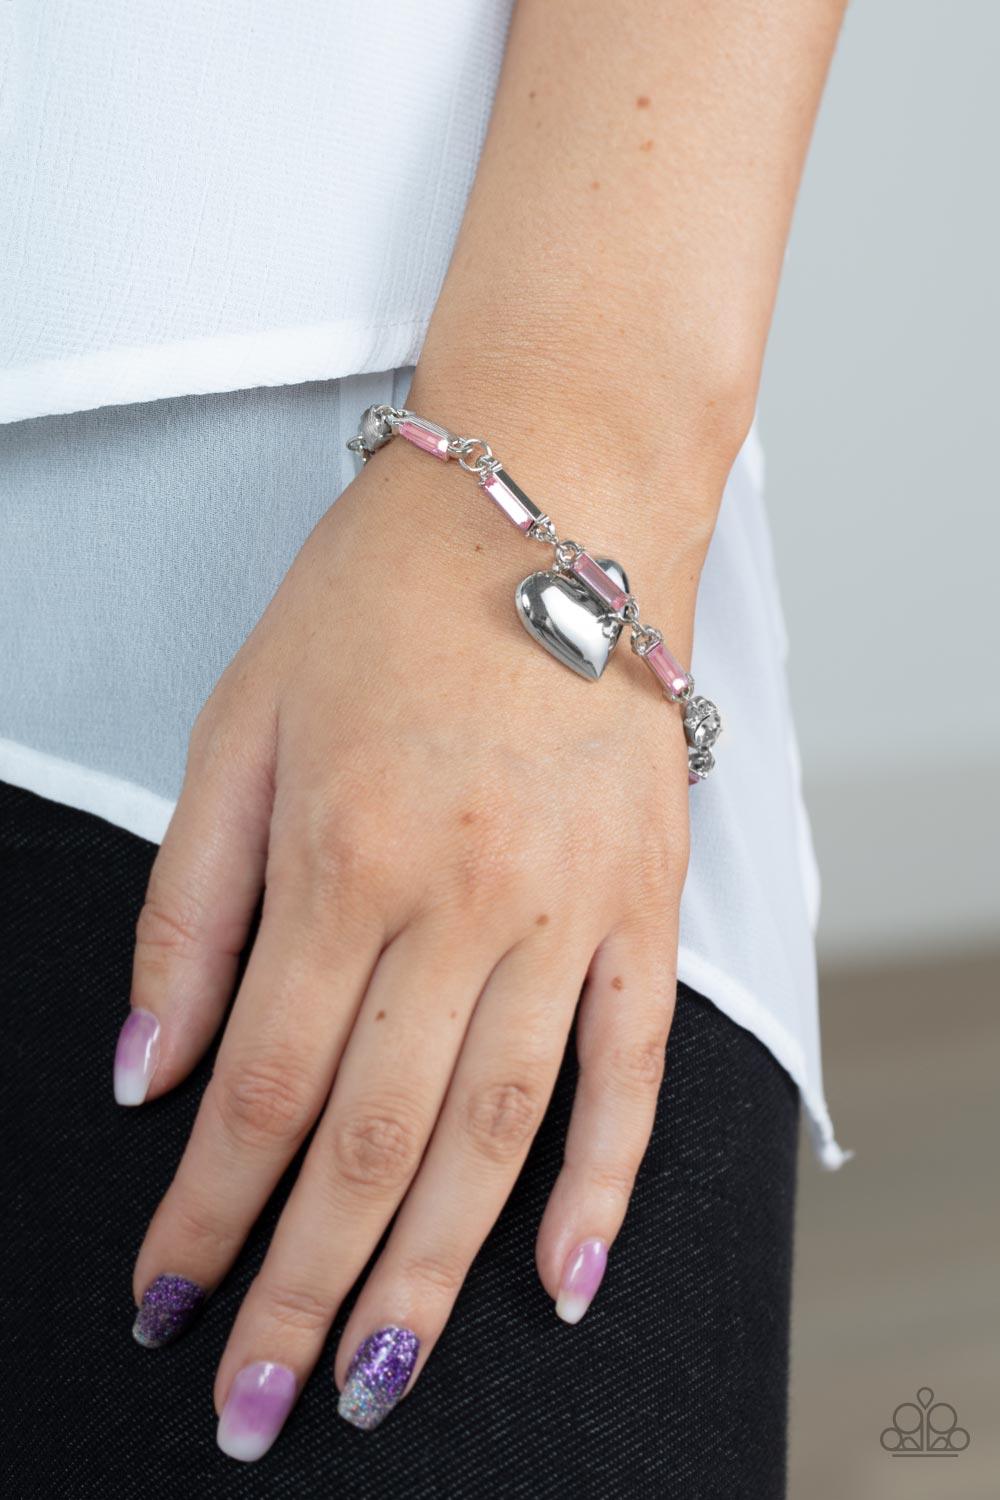 Paparazzi Accessories Sweetheart Secrets - Pink Encased in sleek silver fittings, classic white rhinestones and emerald cut pink rhinestones delicately link into a sparkly chain around the wrist. A shiny silver heart charm swings from the glittery compila